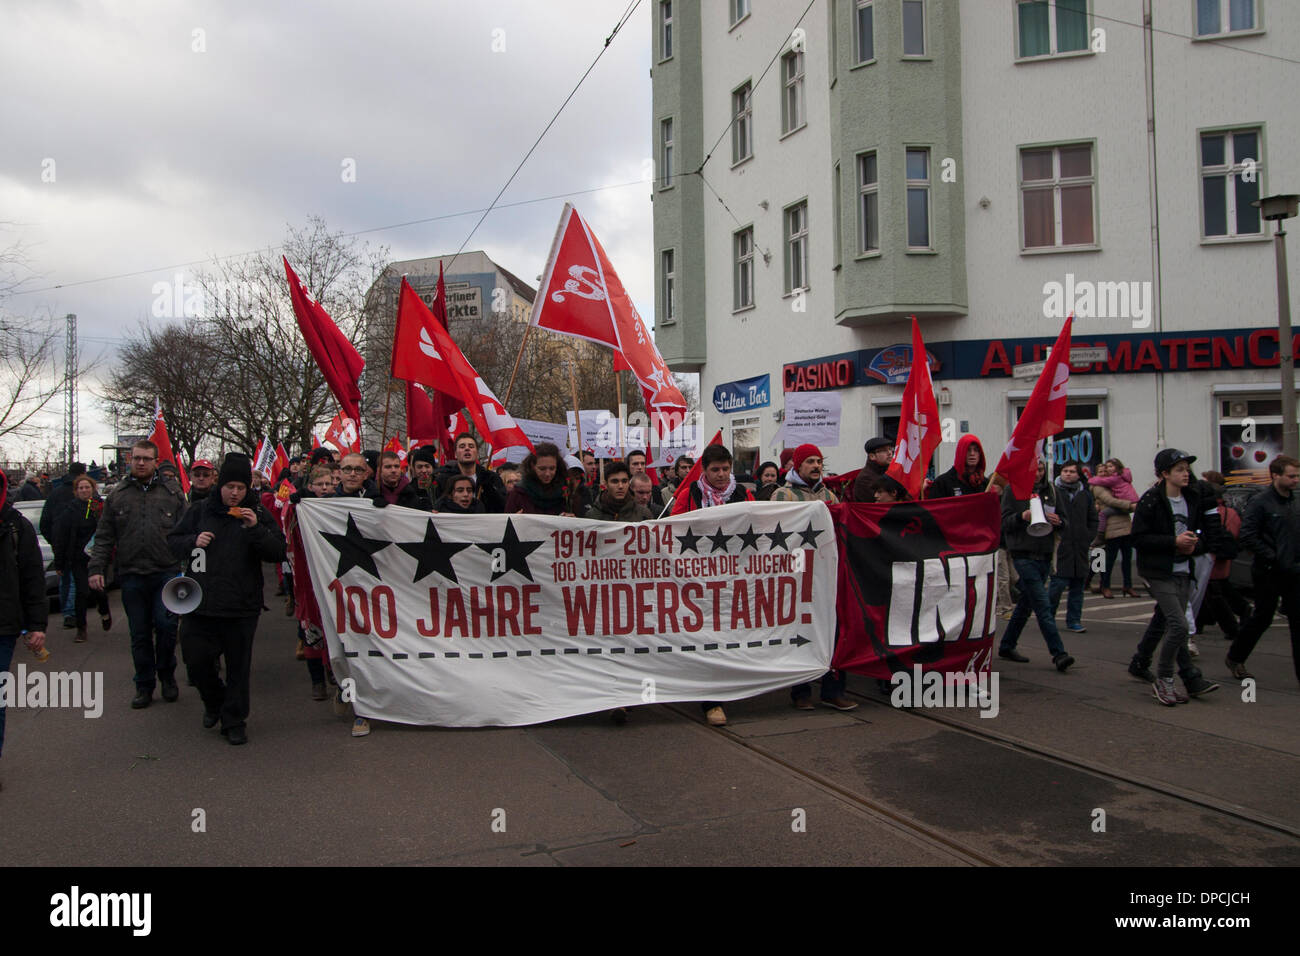 12th Jan. 2014. Berlin, Germany. Liebknecht-Luxemburg-Demonstration 2014 in remembrance of Rosa Luxemburg and Karl Liebknecht, for internationalism and against war. Stock Photo